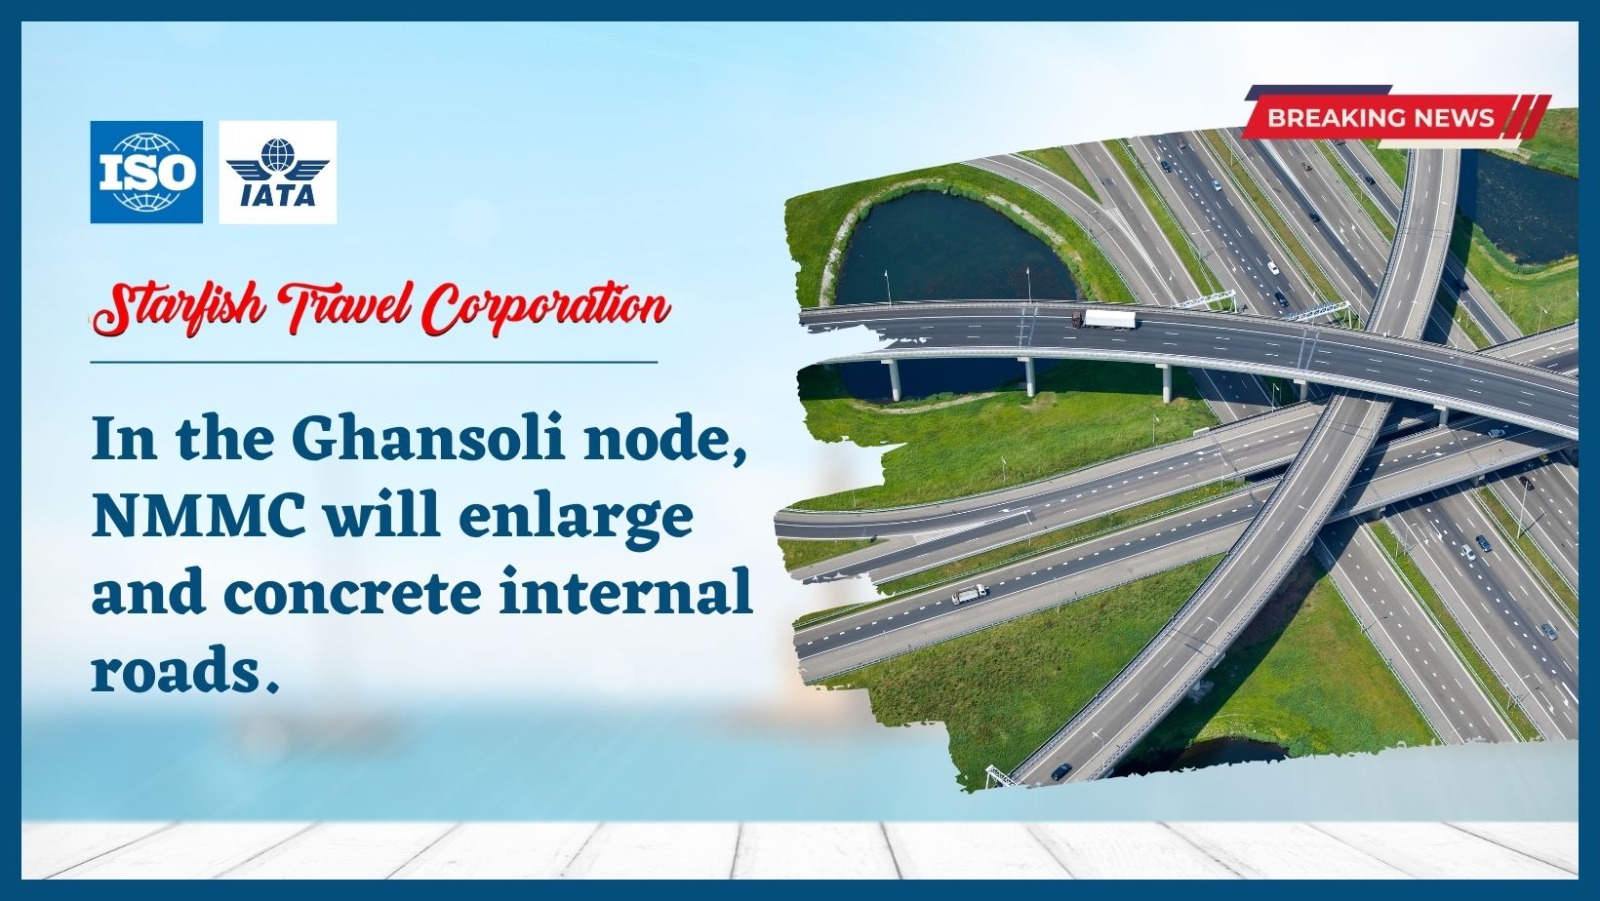 In the Ghansoli node, NMMC will enlarge and concrete internal roads.